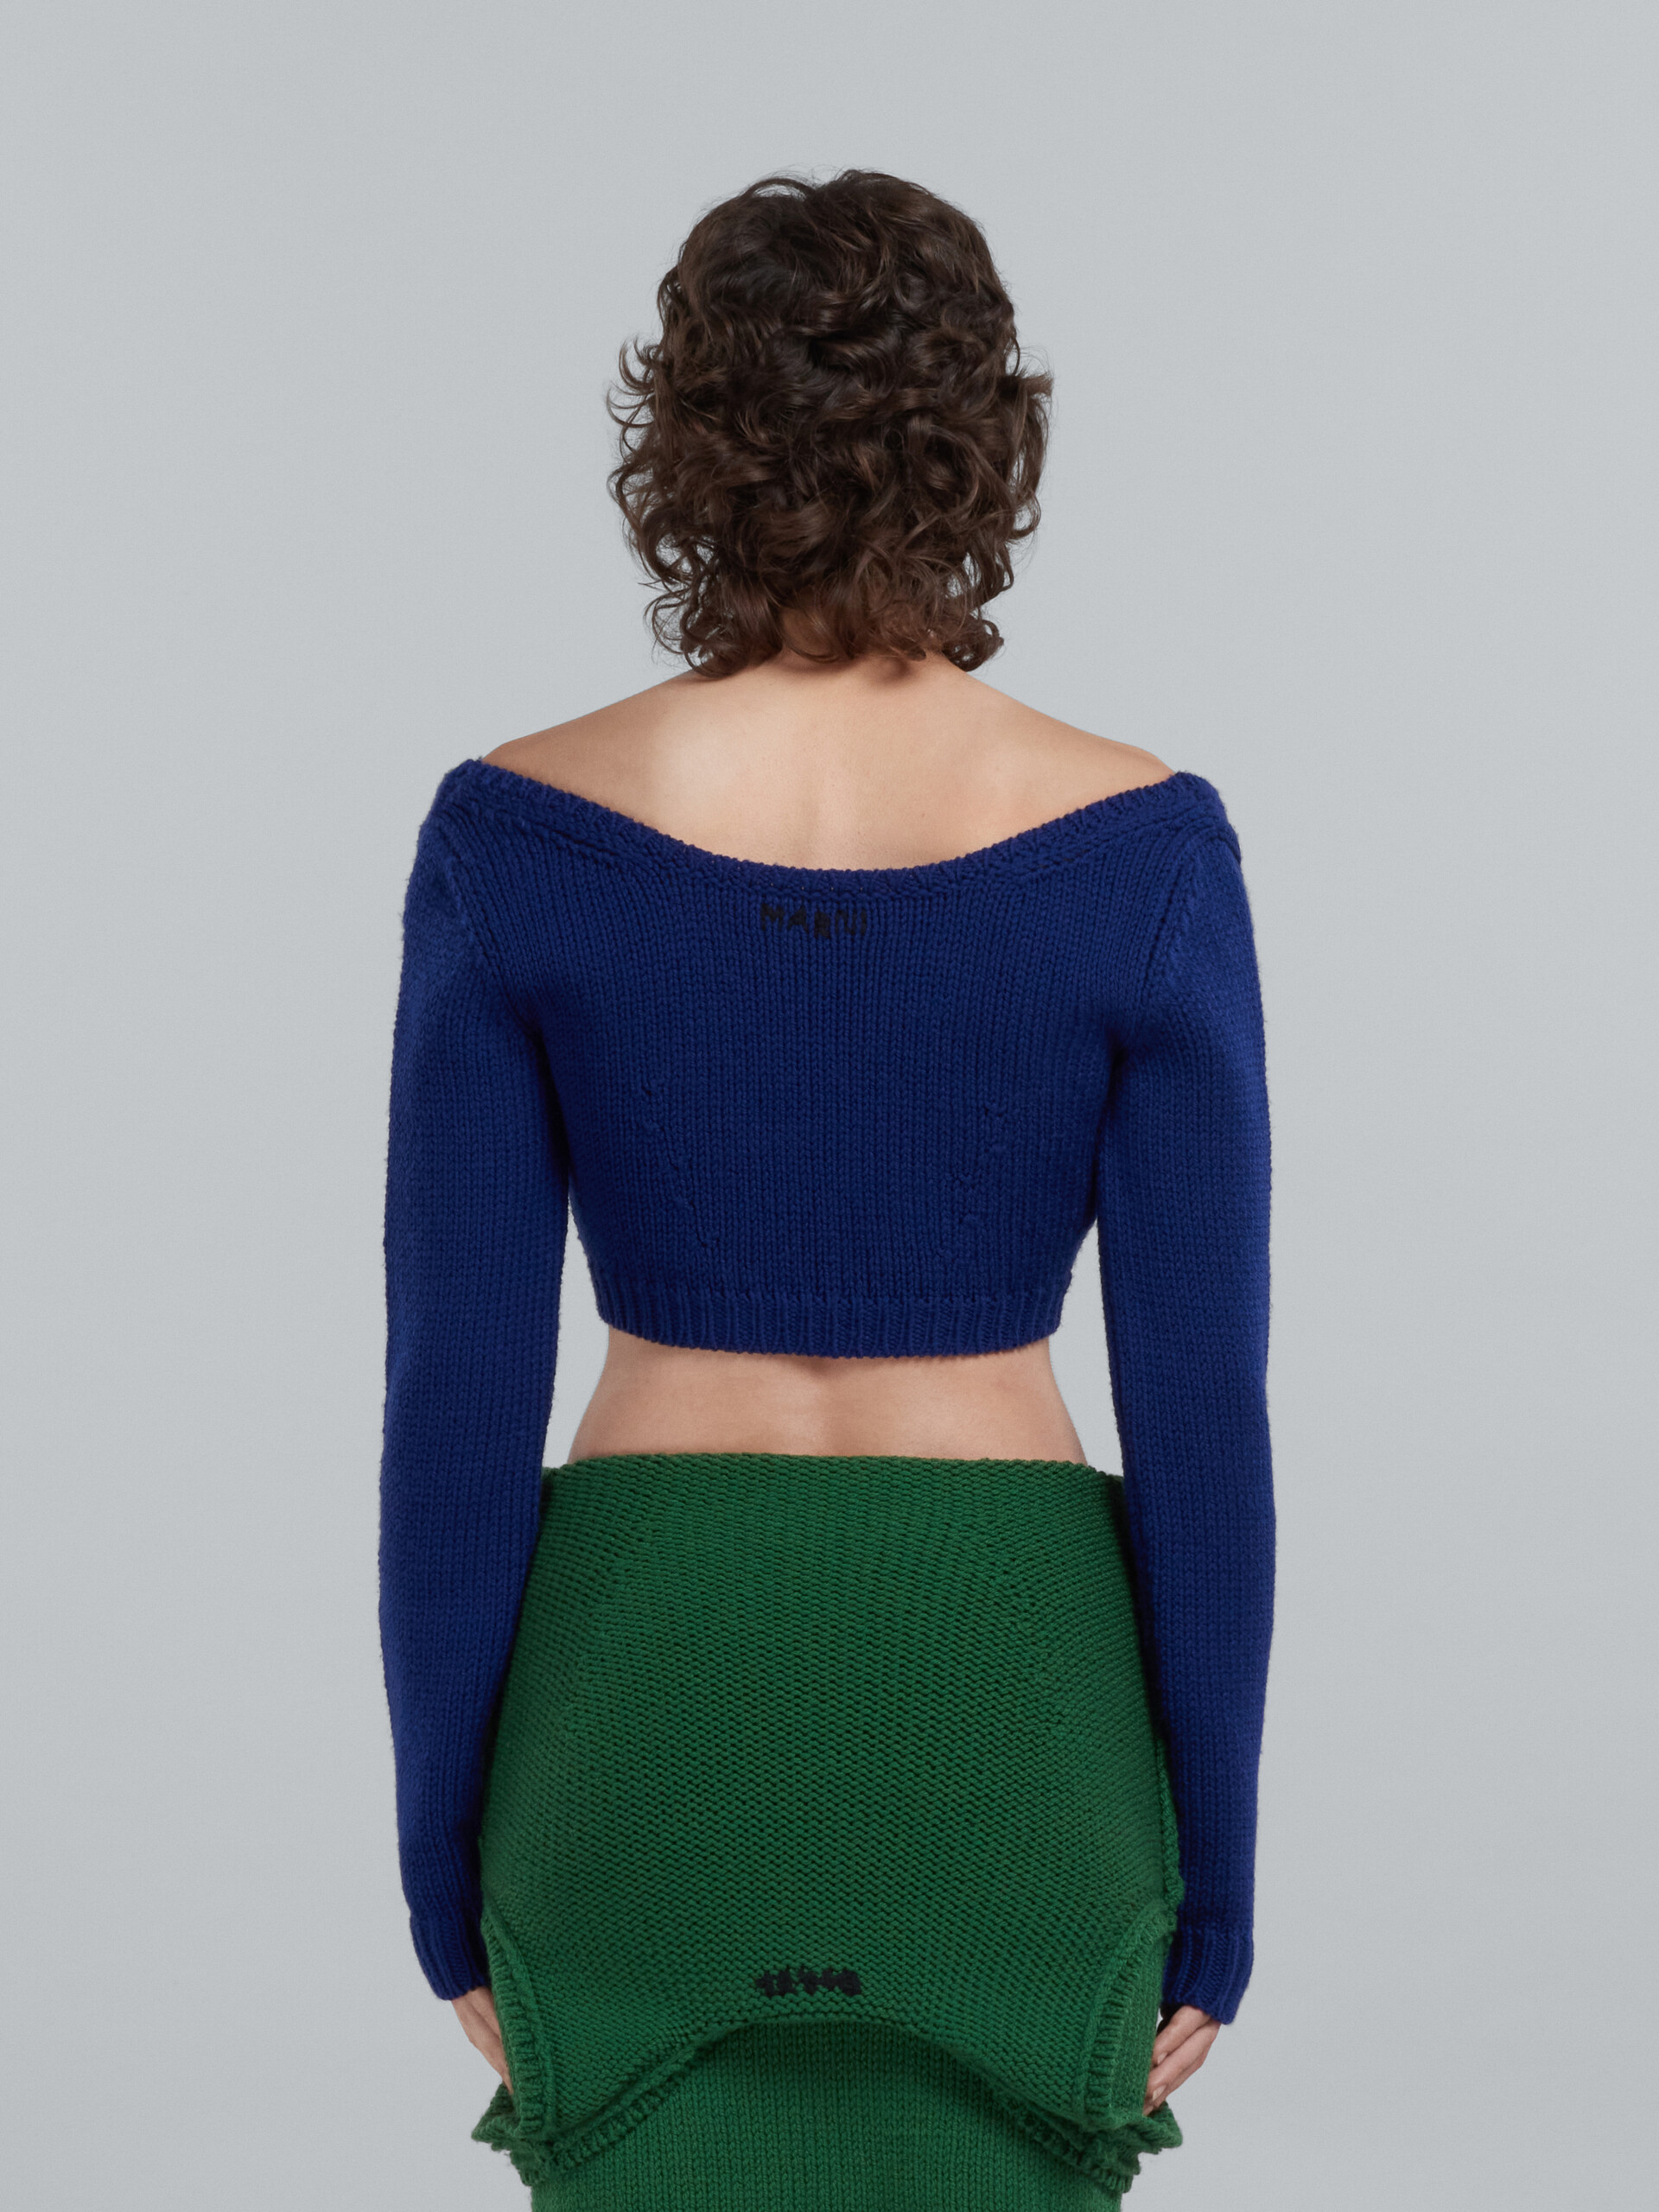 Cropped sweater in blue wool - Pullovers - Image 3